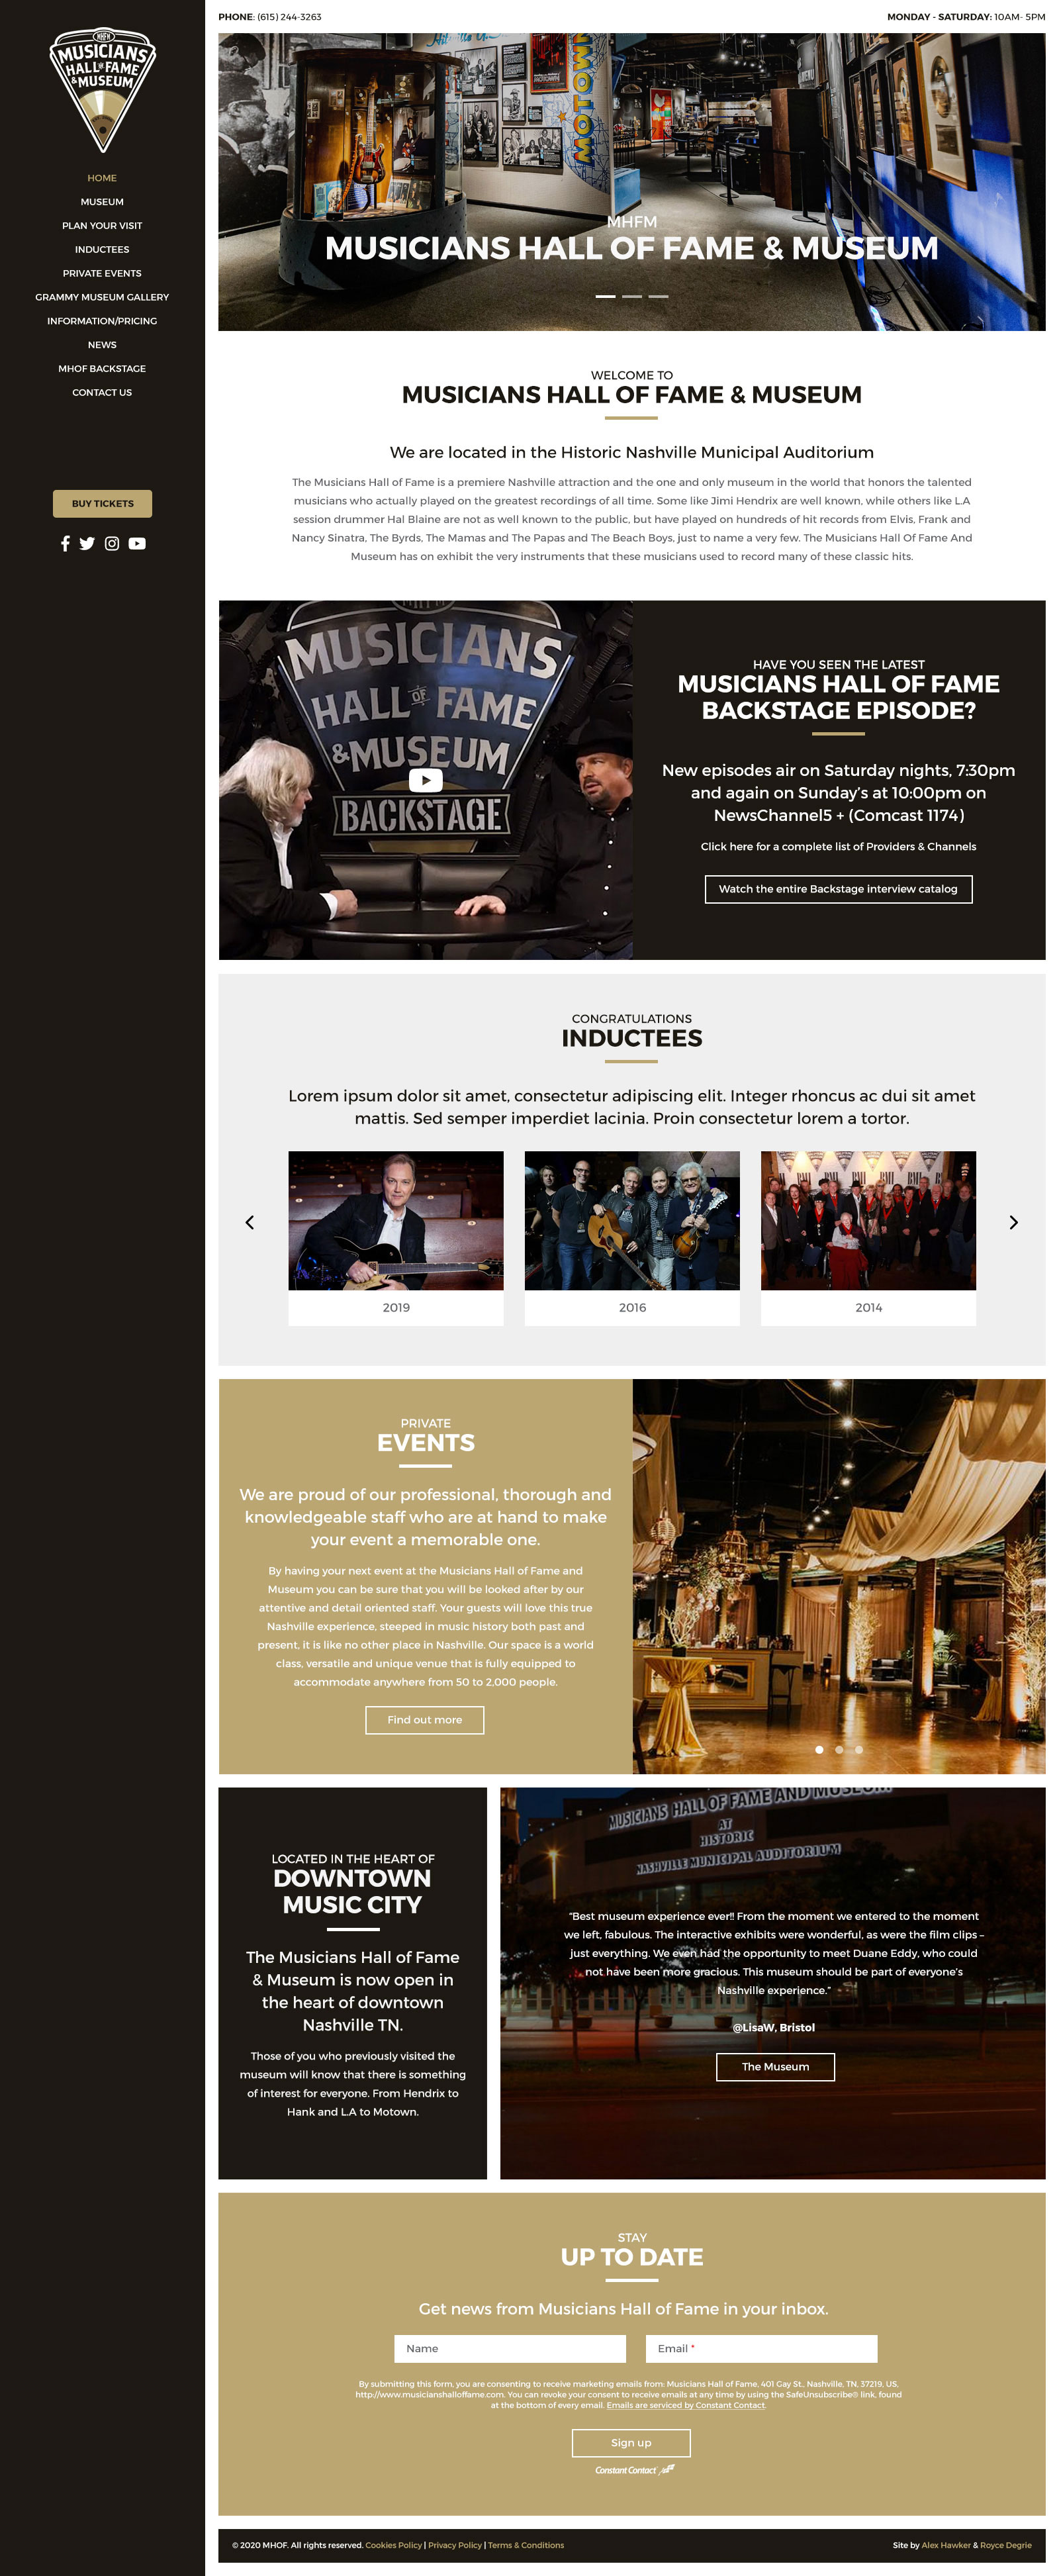 MHOF home page